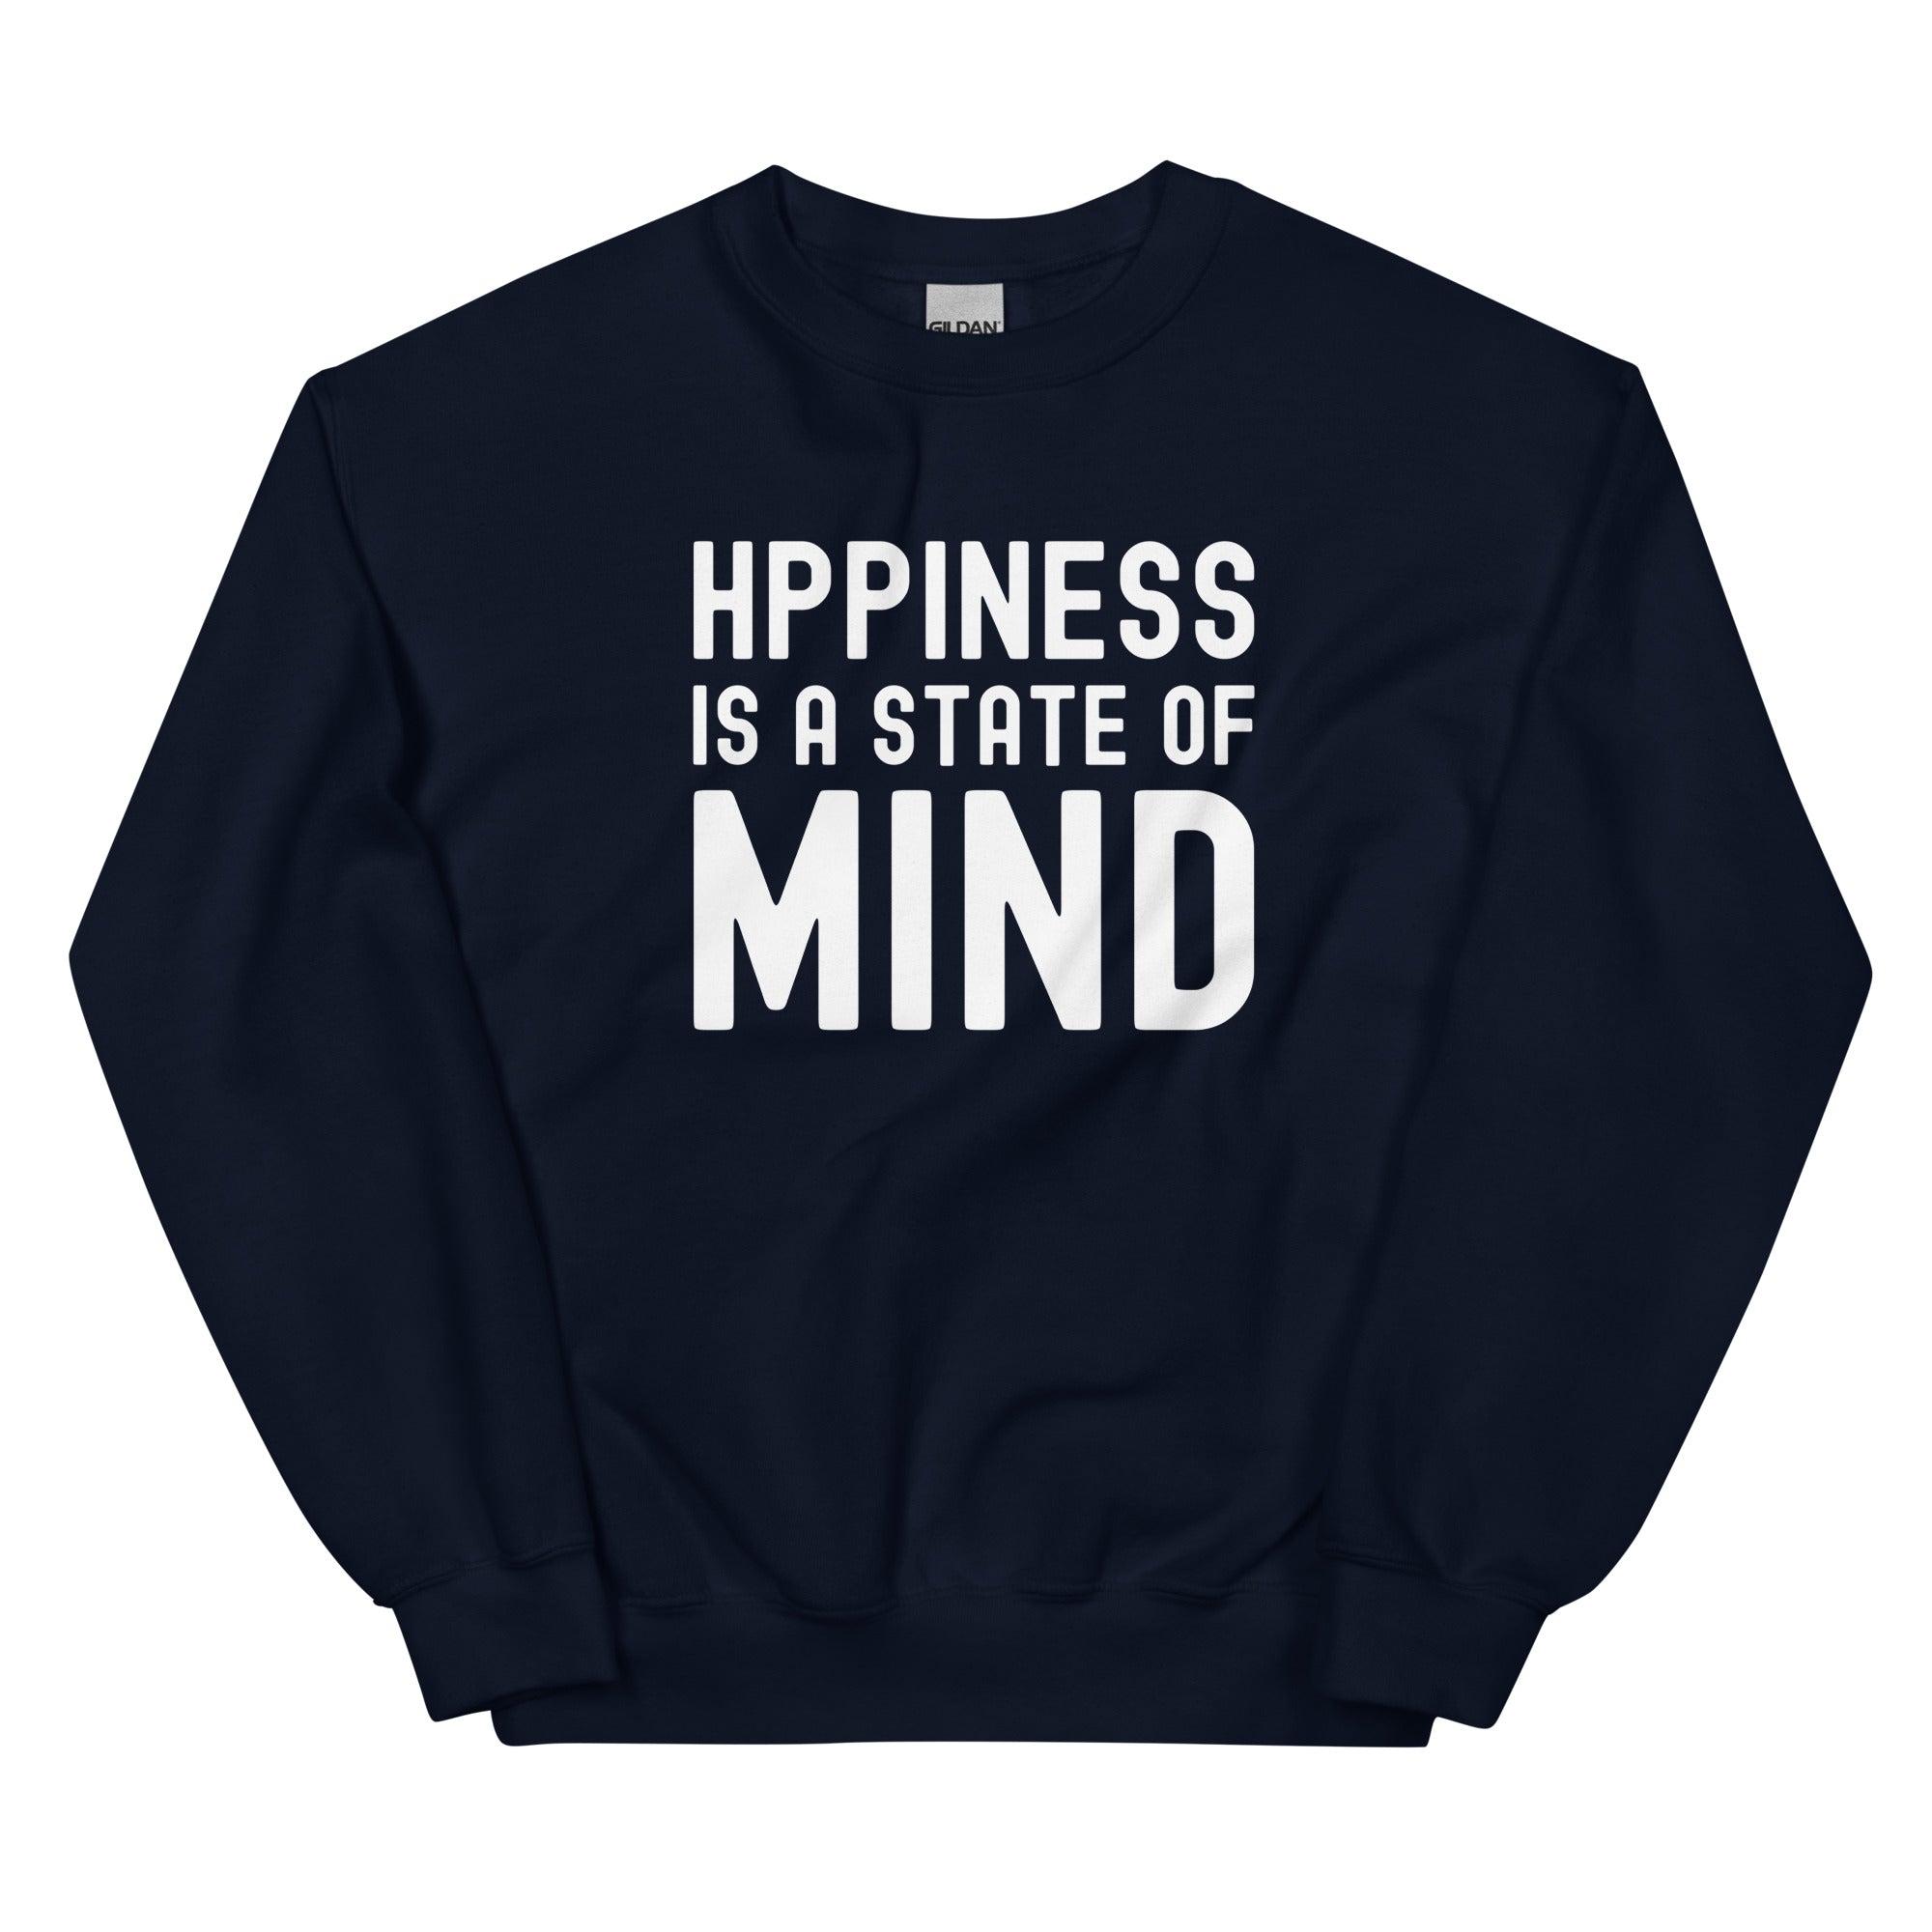 Unisex Sweatshirt | Hppiness is a state of mind